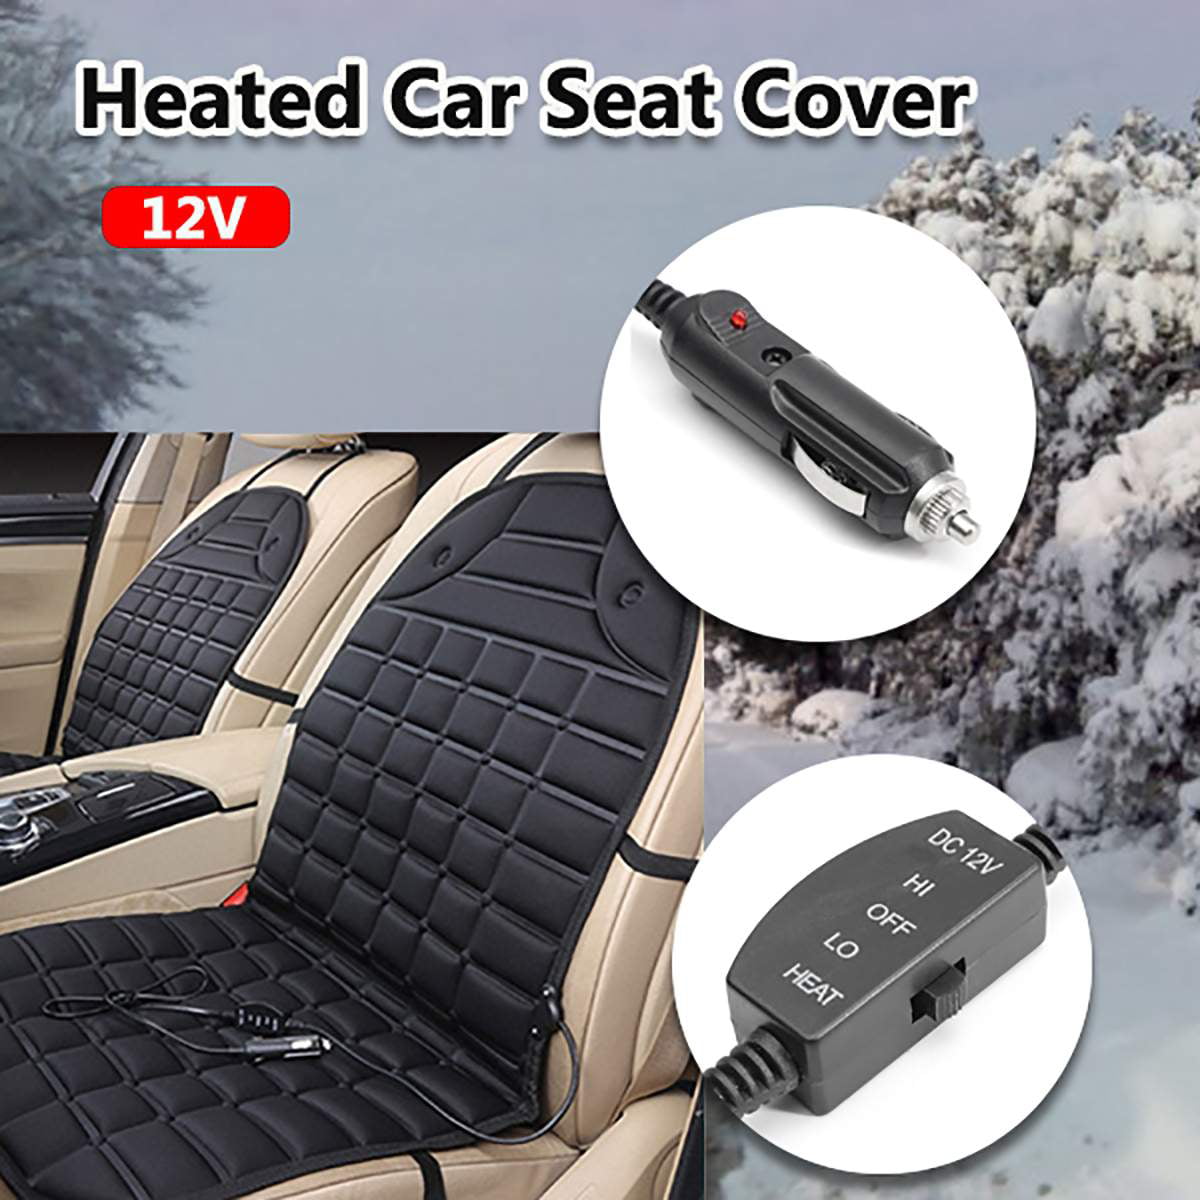 12V Heated Car Seat Cushion with Lumbar Support Specially Secured Fitting 4-Claw Plug Hold 4-Direction Between Plug & Socket ObboMed SH-4160F Patented 4-Claw Ultra-Tight Fit Plug 3-Stage Switch 